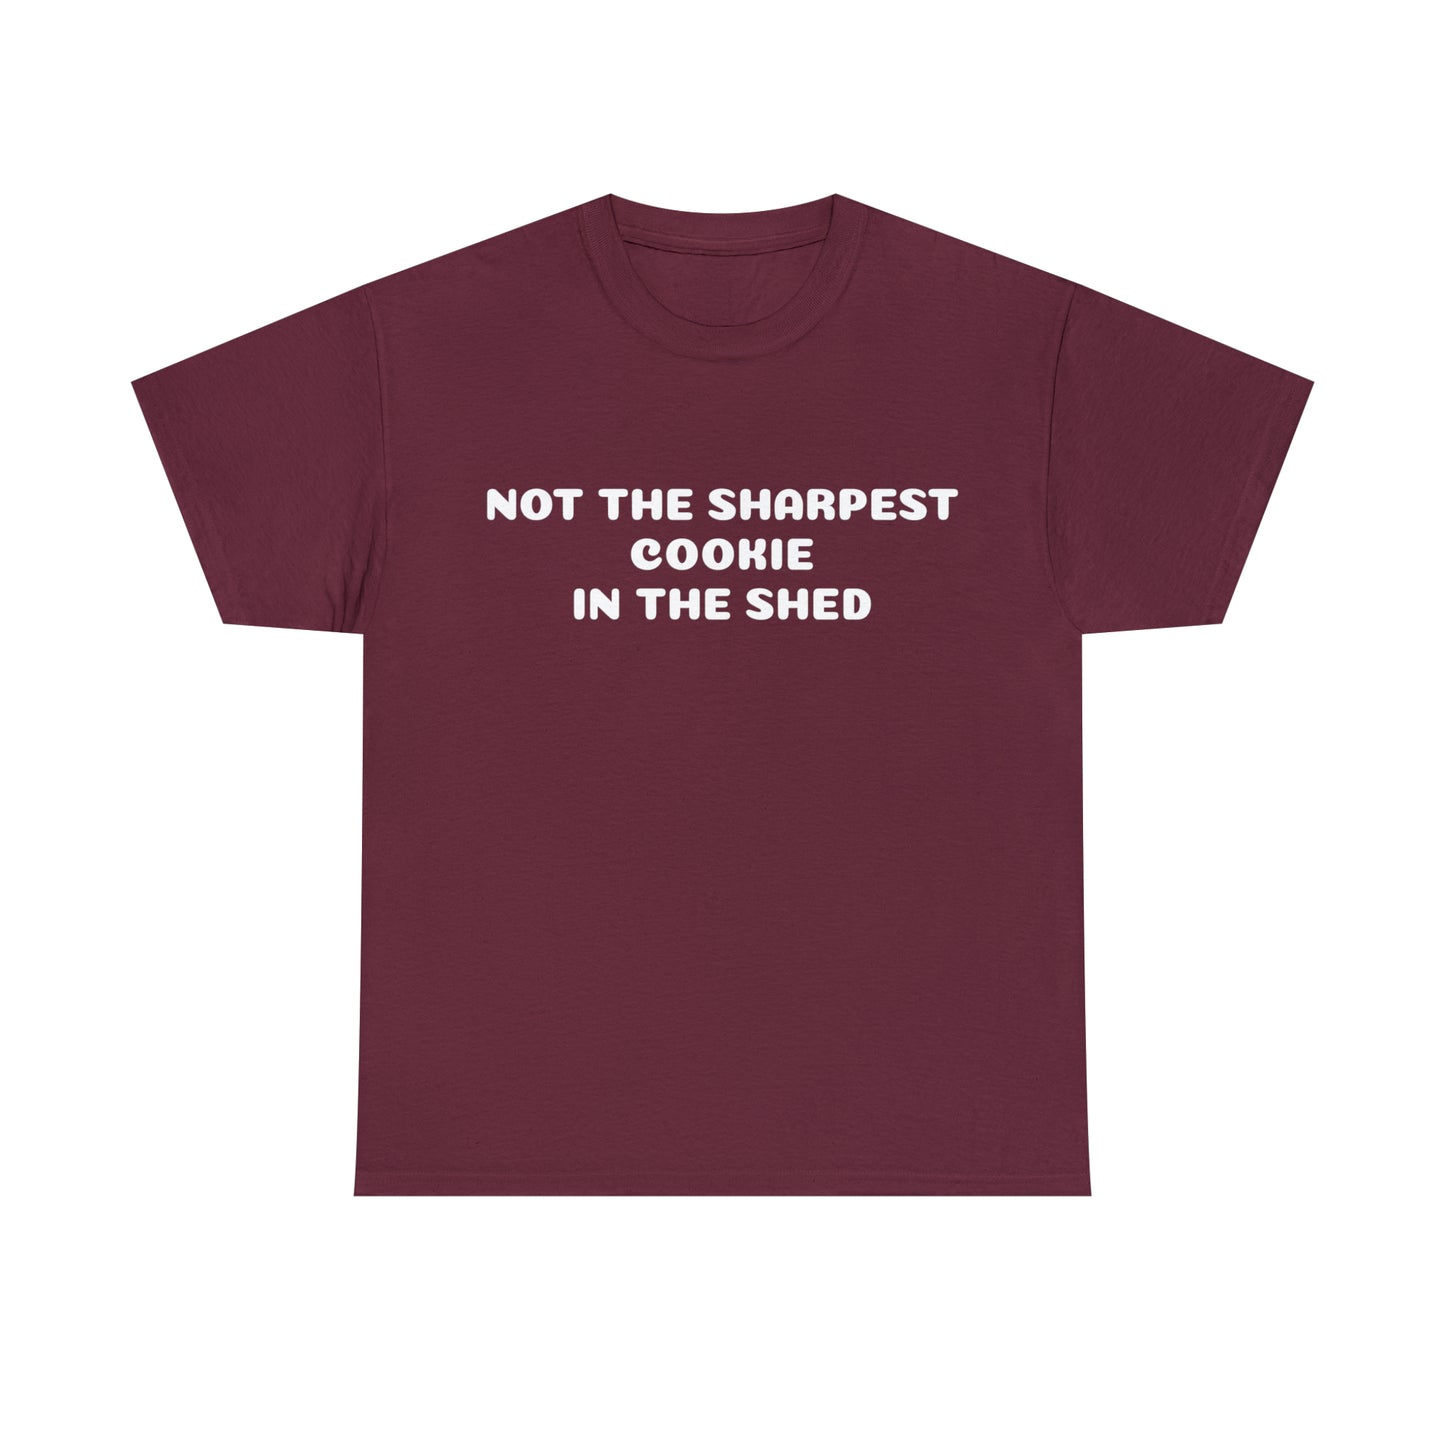 Custom parody T-shirt, Not the sharpest cookie in the shed shirt design